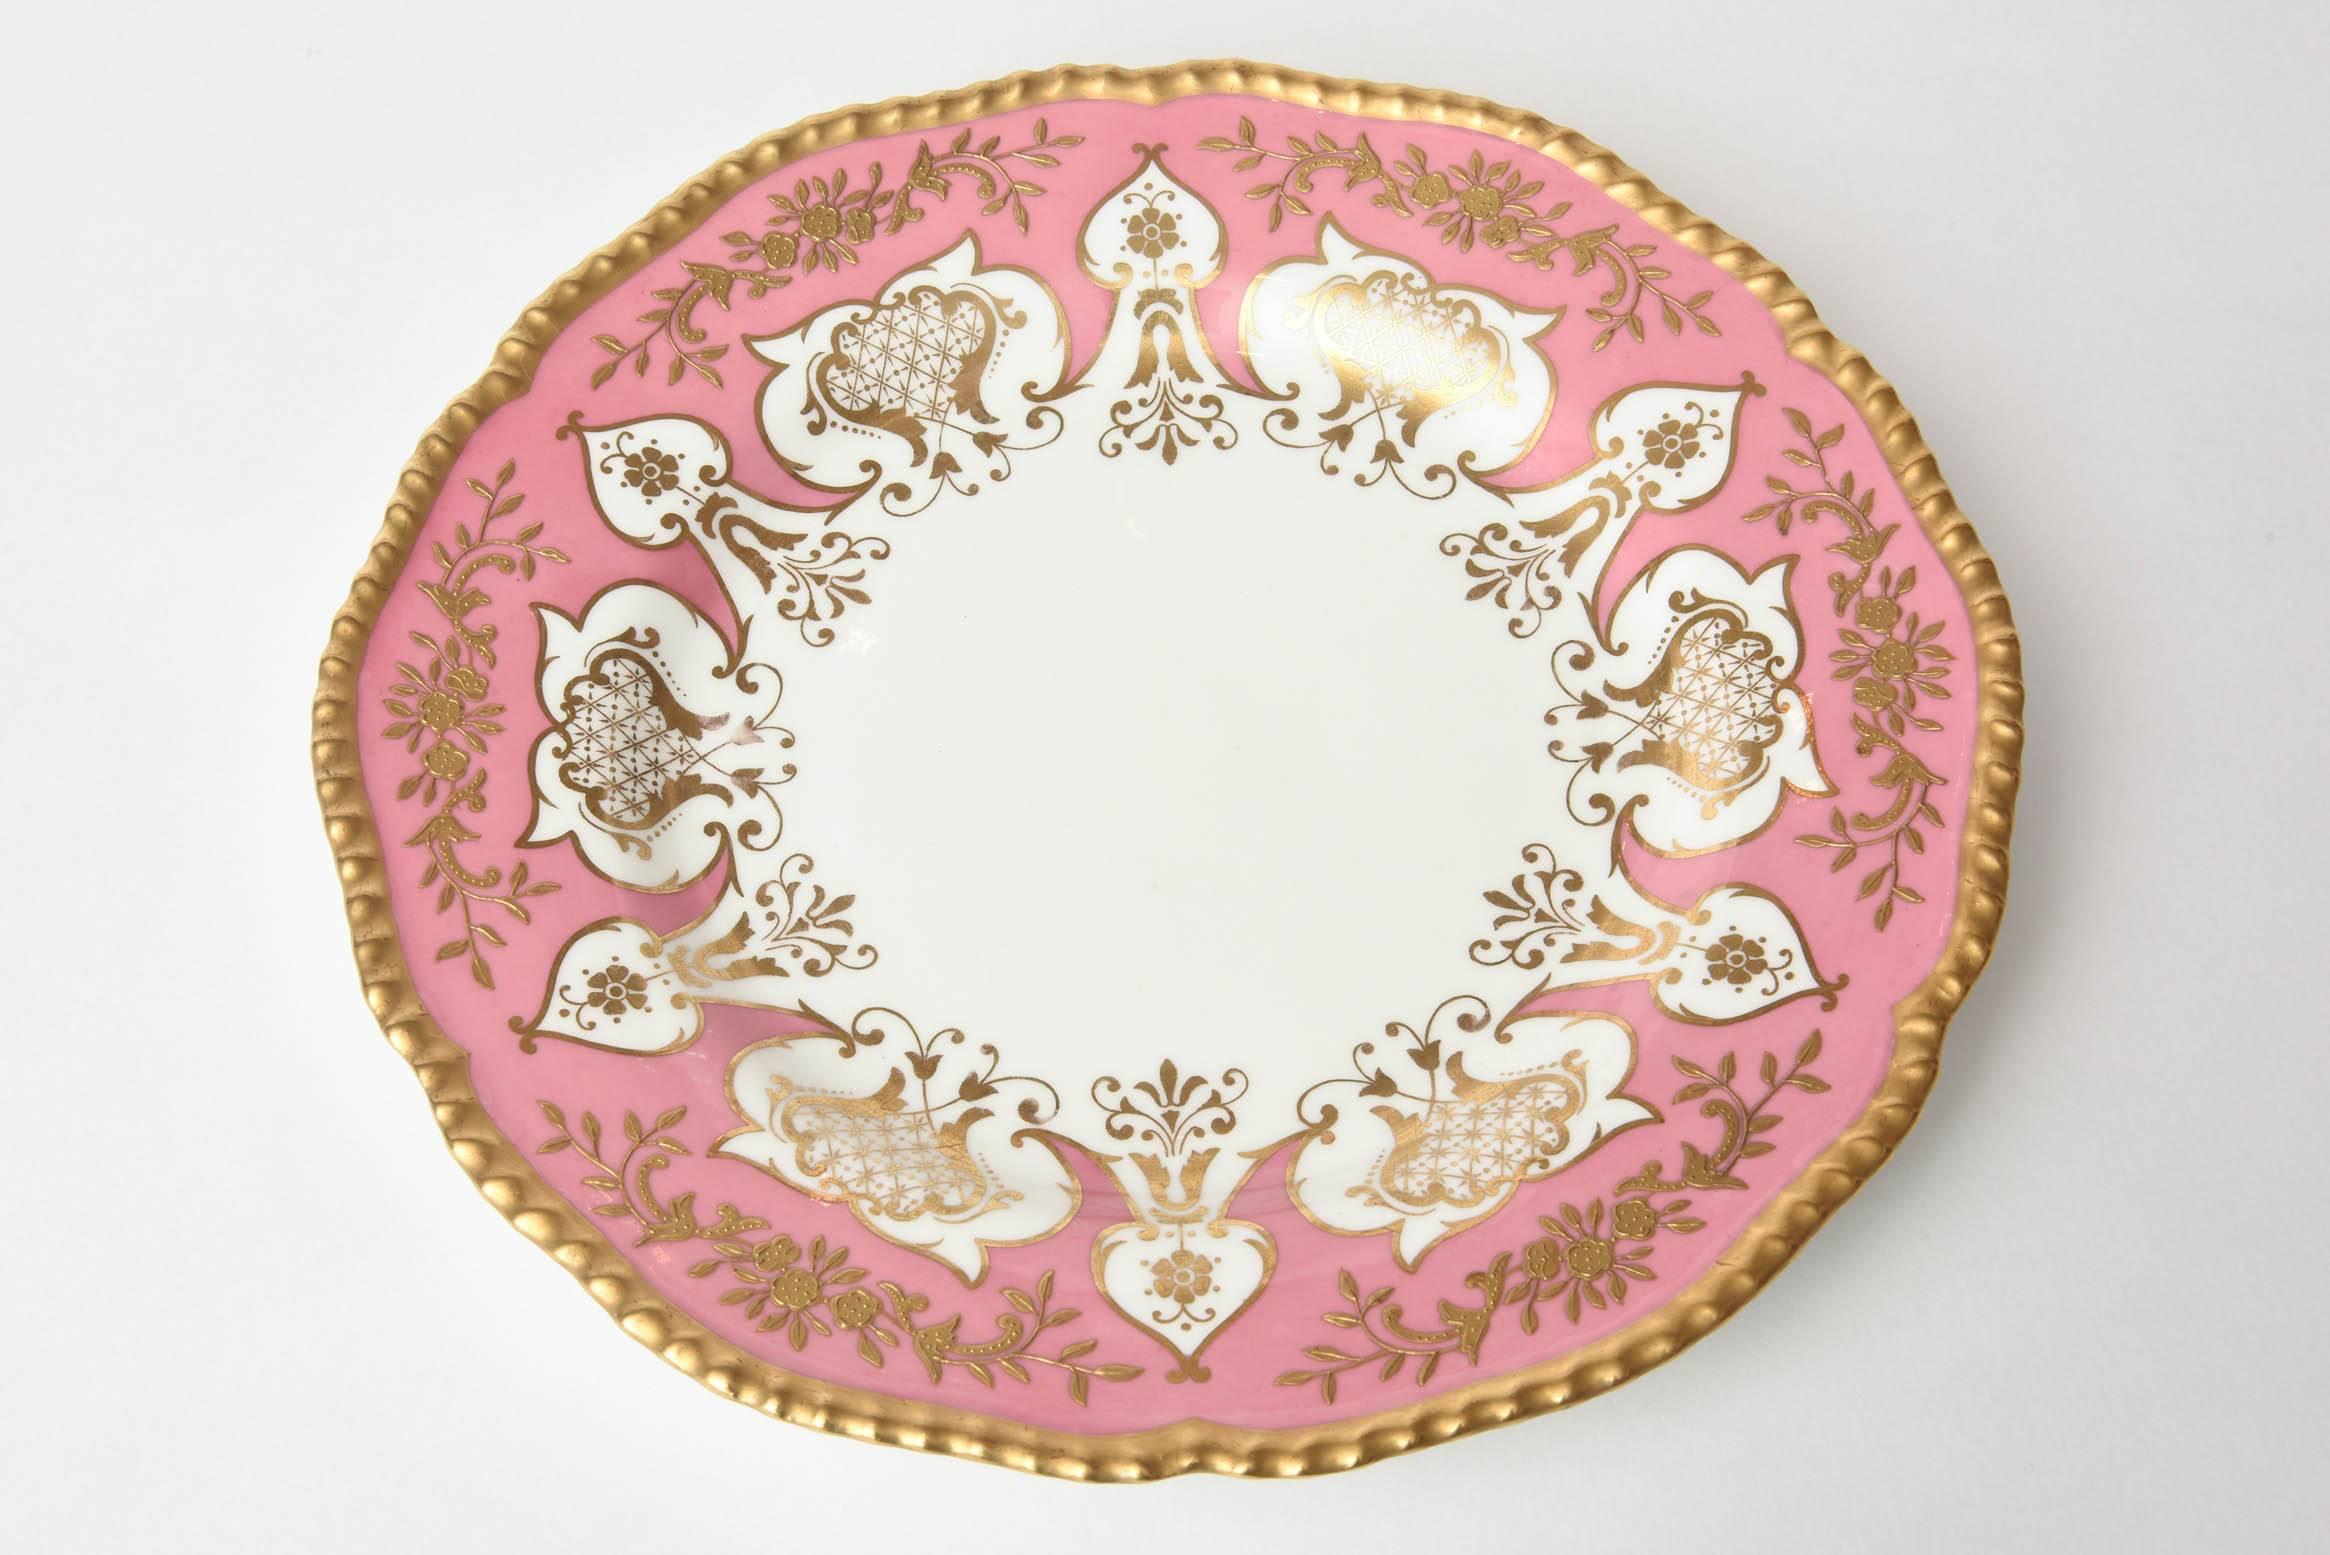 Early 20th Century 12 Dinner or Presentation Plates, Antique English Pink Heavily Gilded, Coalport